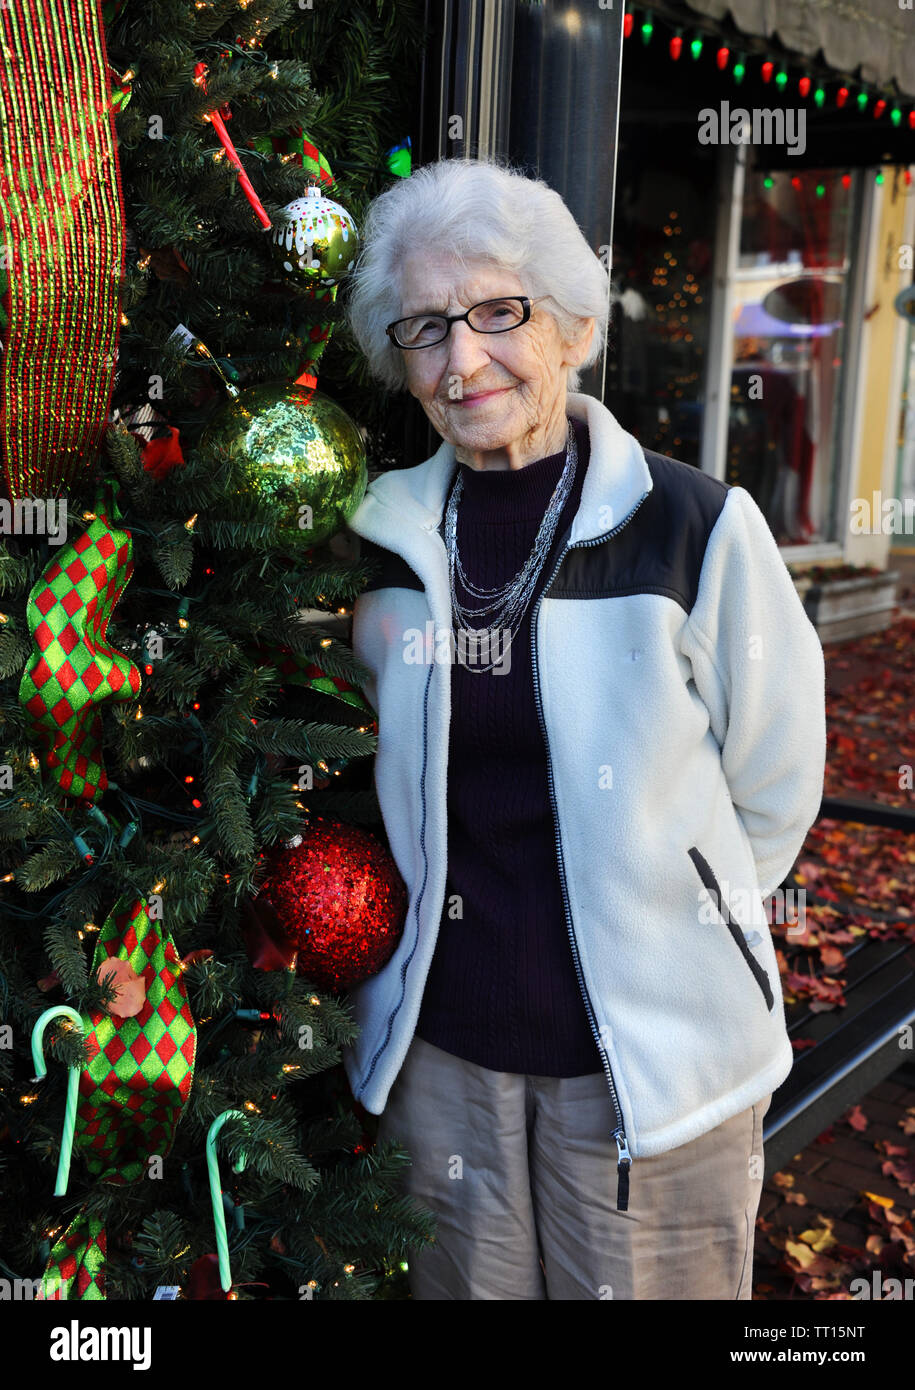 Grandmother, with white hair and glasses, stands besides a Christmas street decoration while shopping in downtown El Dorado, Arkansas.  She has on tan Stock Photo